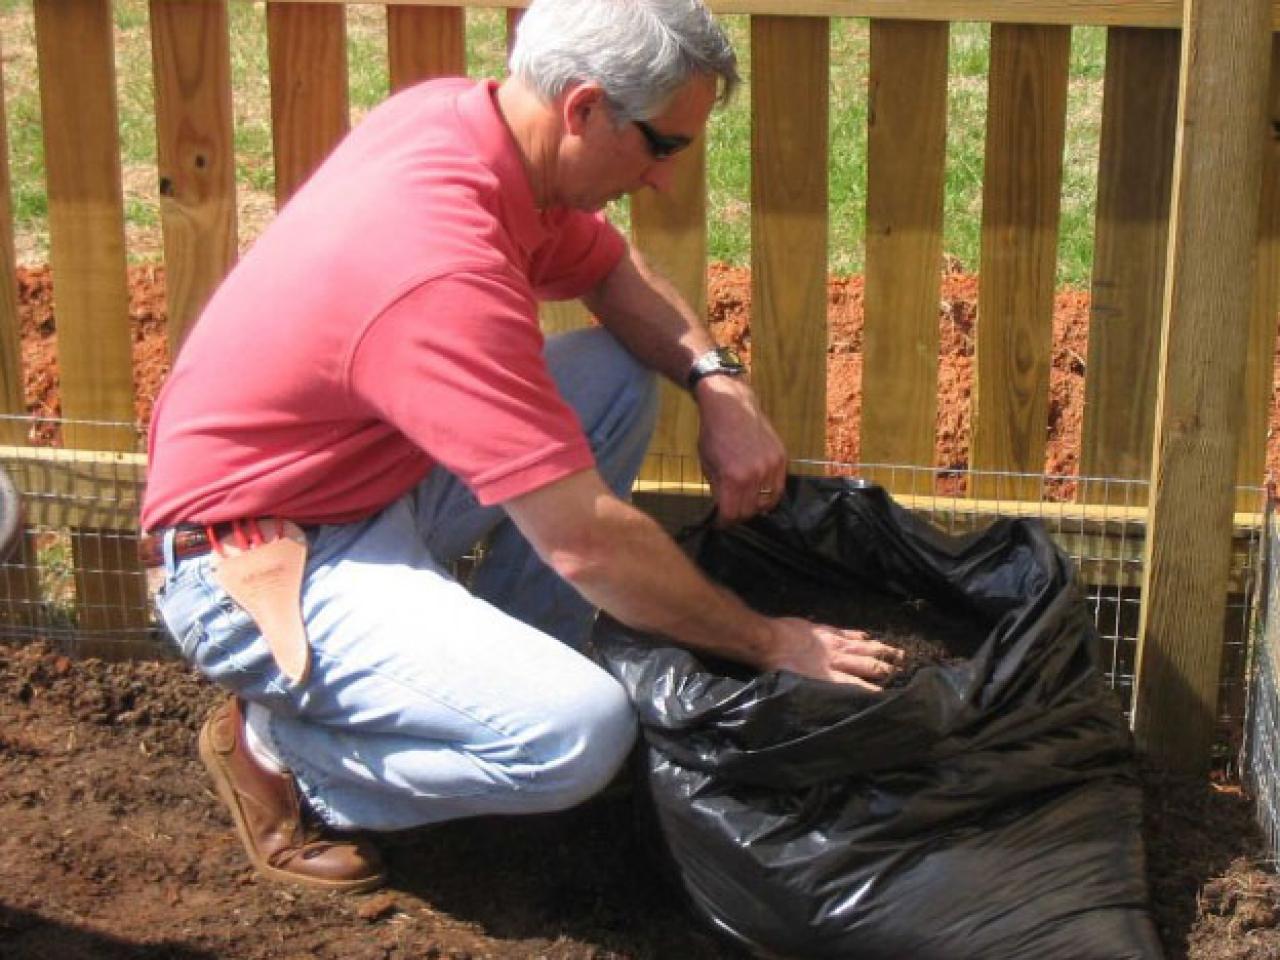 How to Grow Potatoes in a Trash Bag